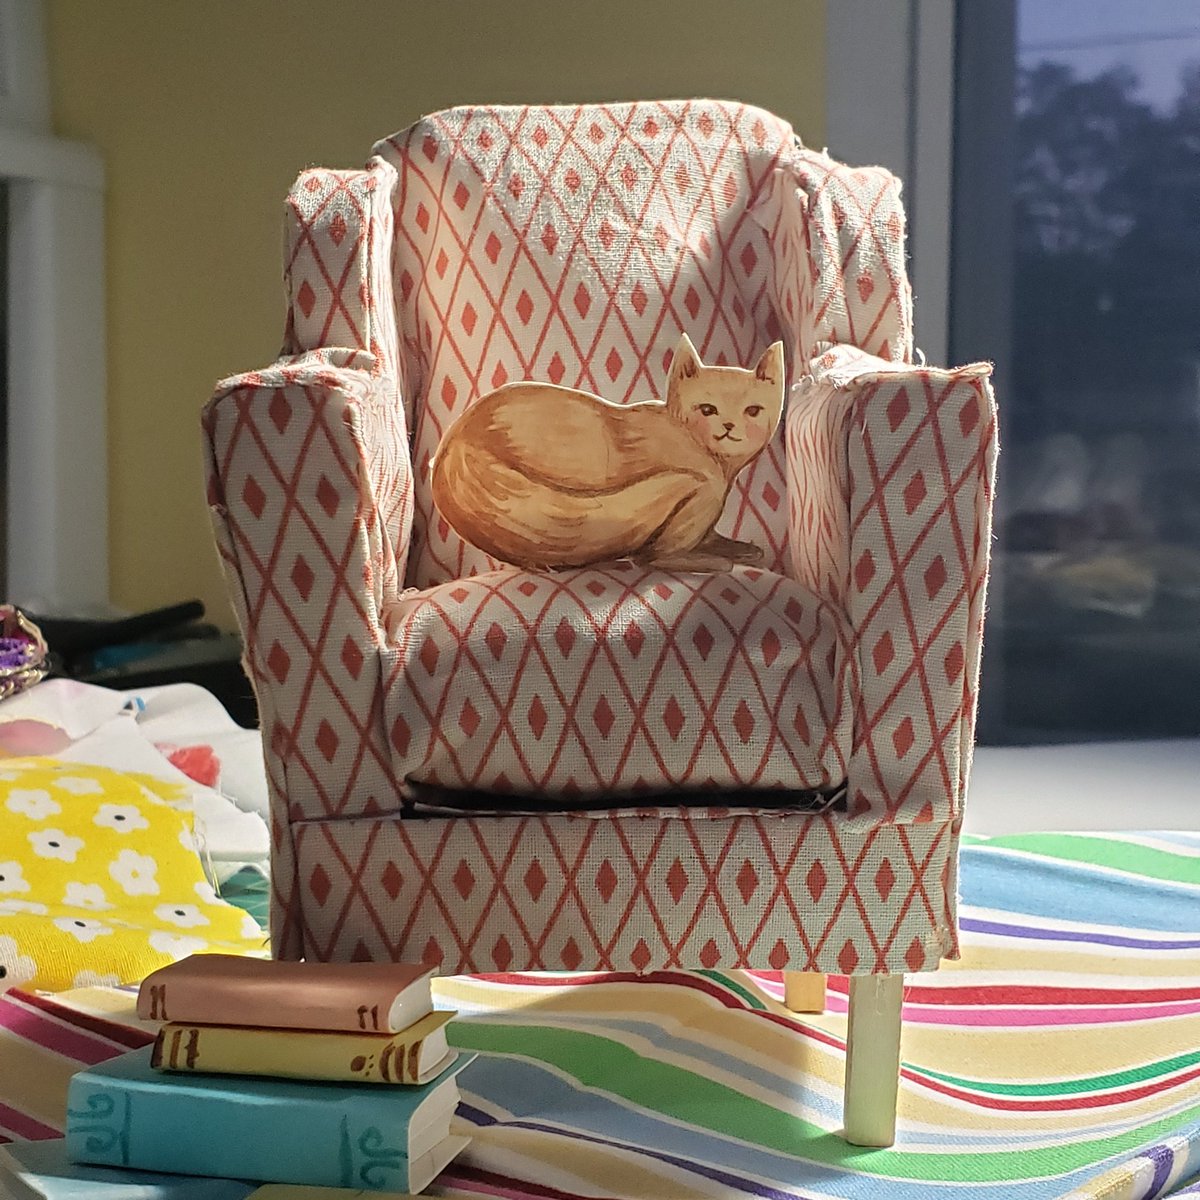 Finished my chair, but look who hopped in it! I have a little reader in the works. More to come!
.
#childrensbooks #illustrationforchildren